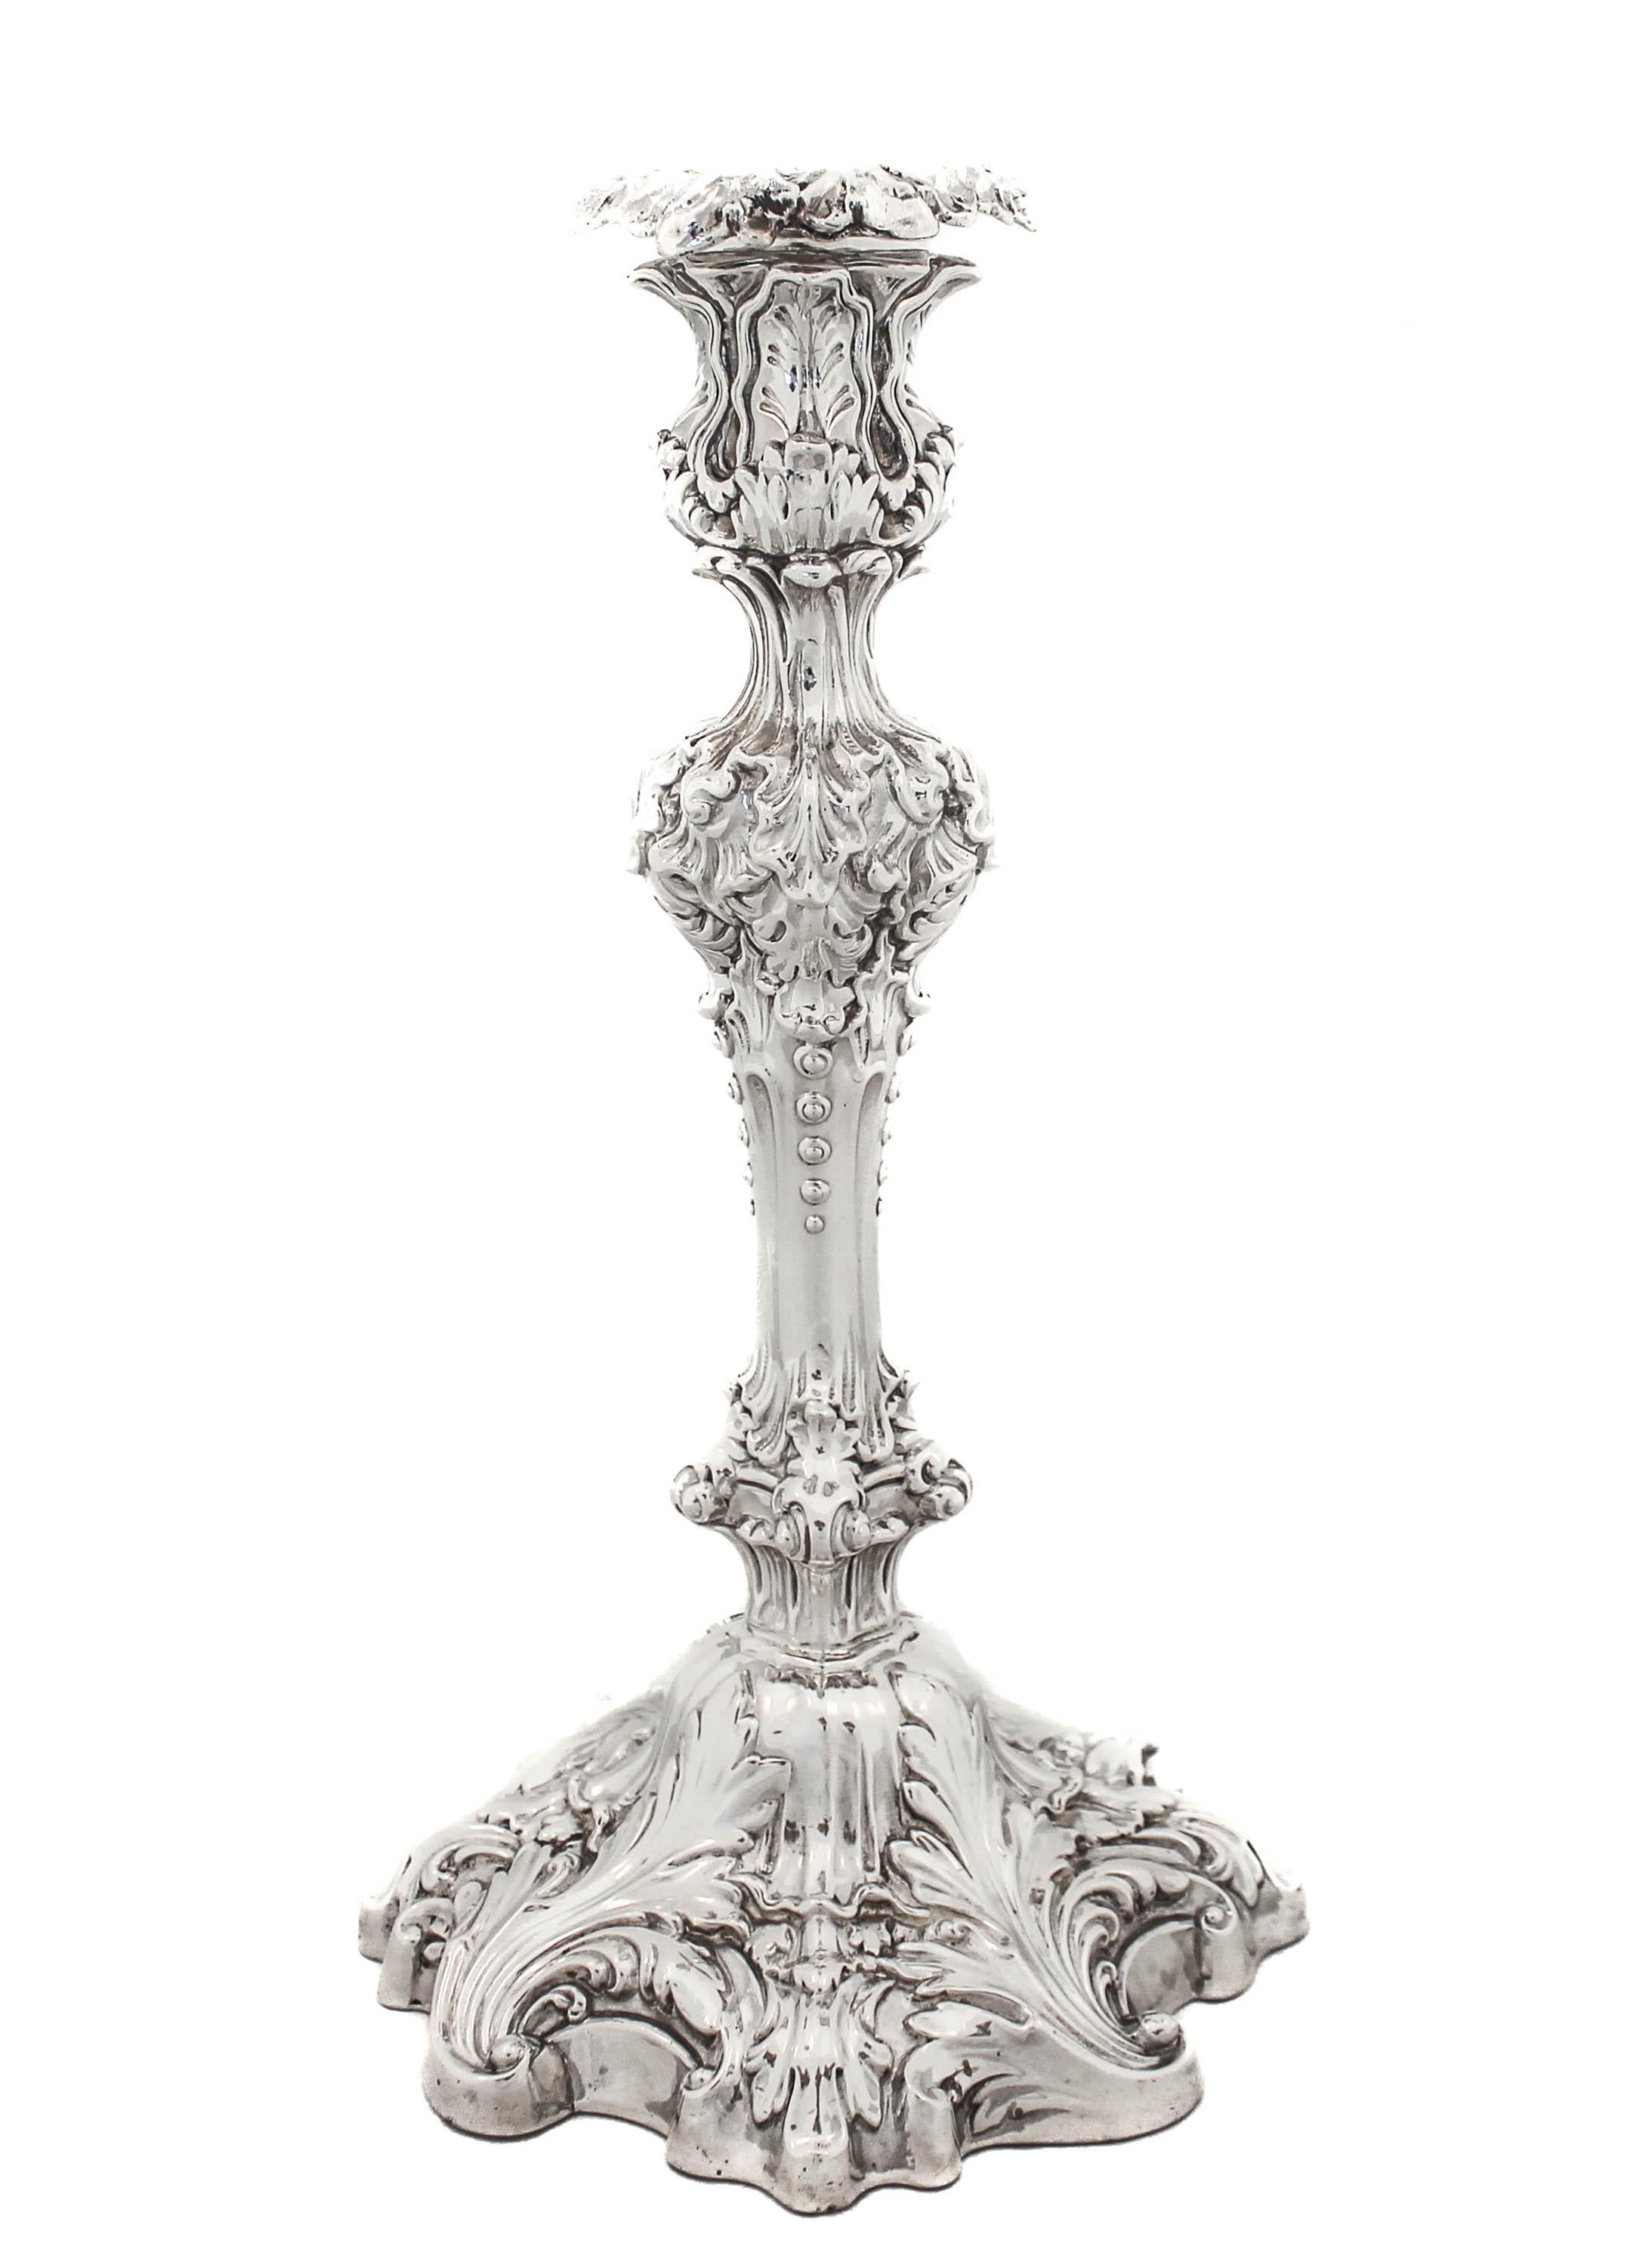 Being offered is a pair of sterling silver candlesticks by Frank W. Smith Silver.  They are designed in the Rococo style.  With their elaborate work and incredible detail, these candlesticks are show stoppers!! They are exceptionally heavy and have